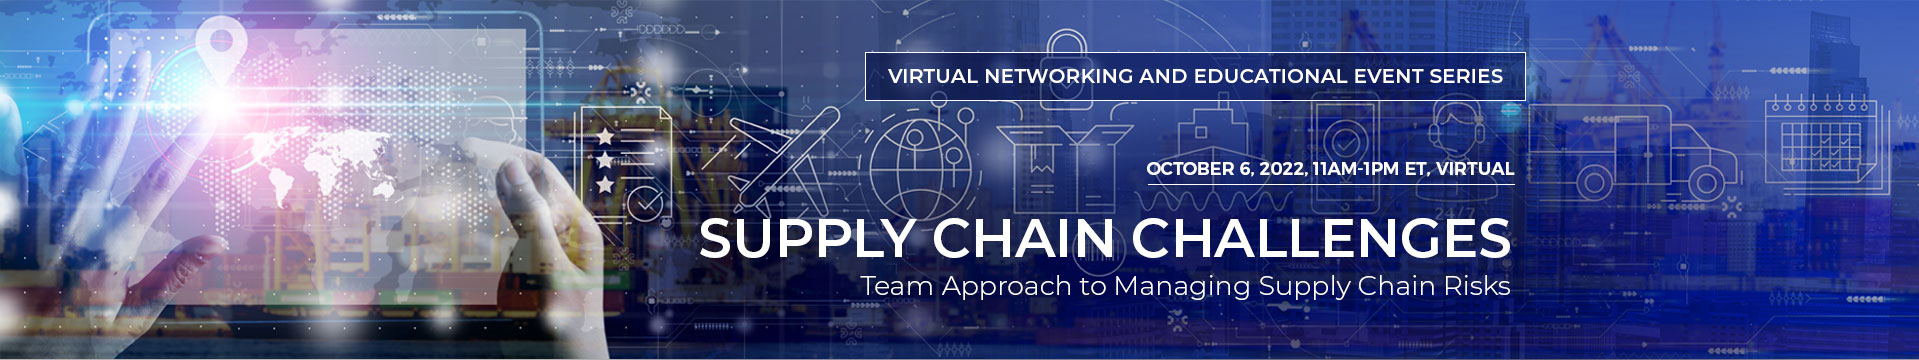 Supply Chain Challenges - Team Approach to Managing Supply Chain Risks